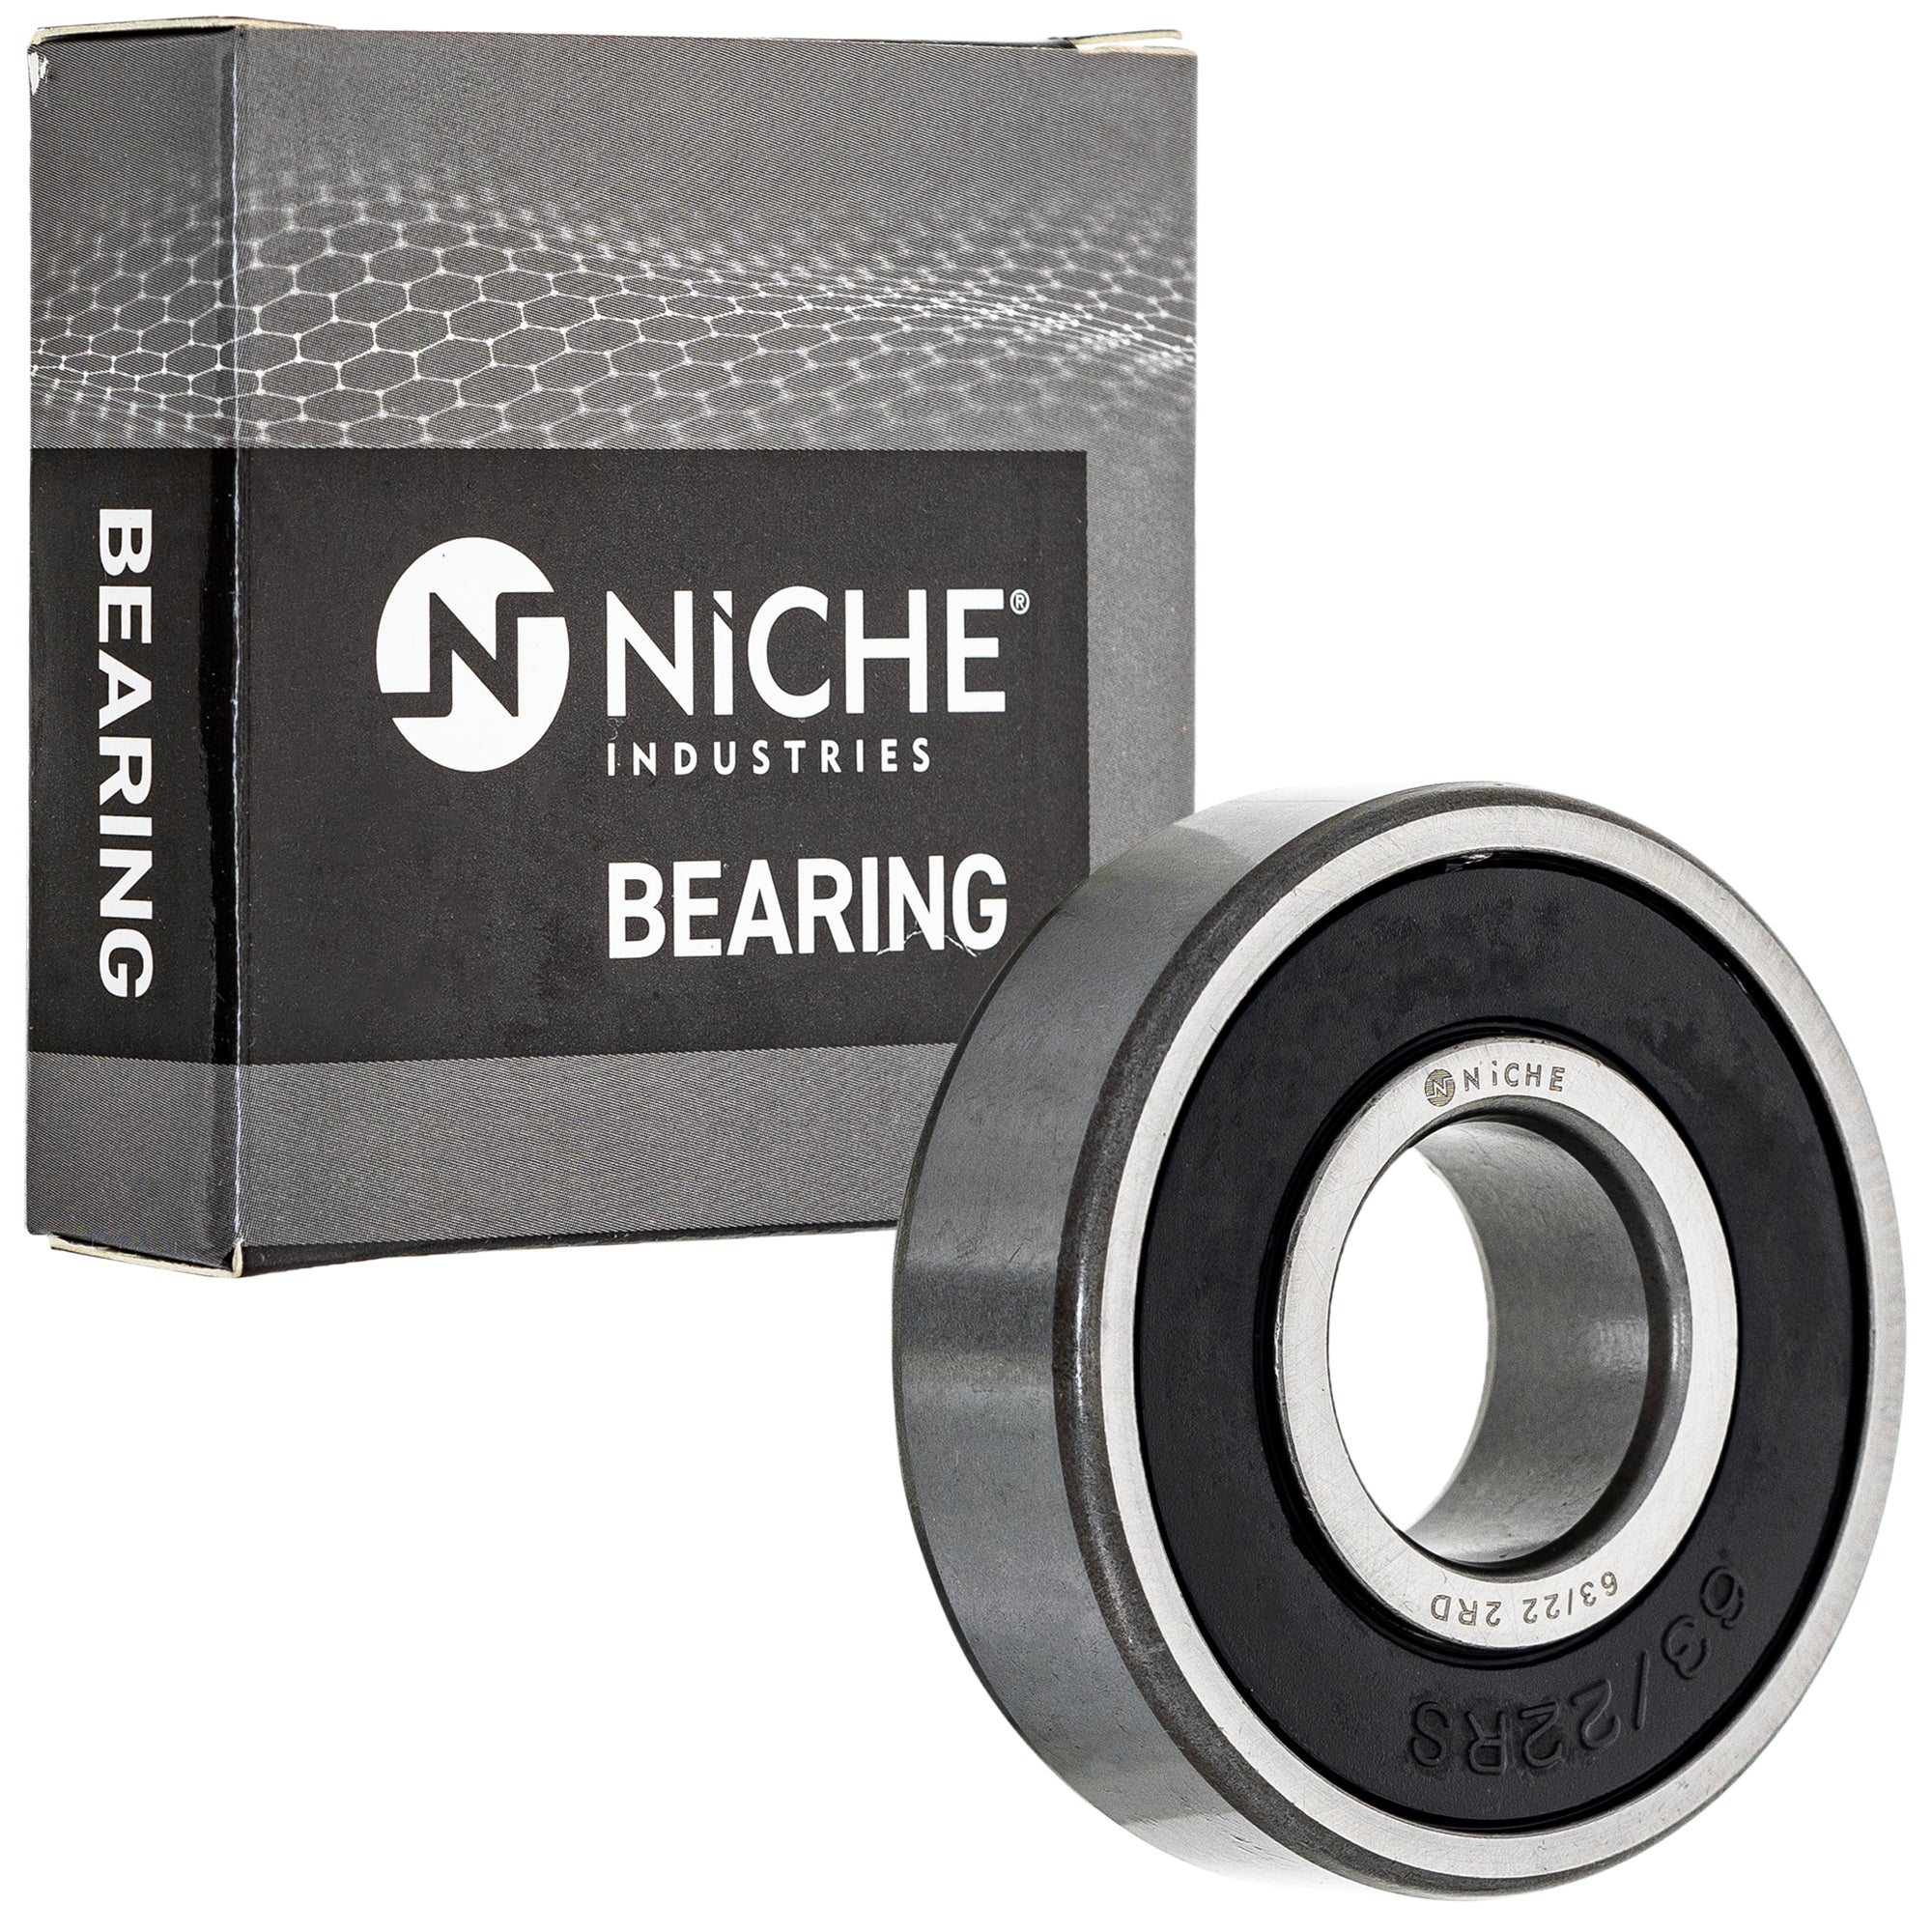 NICHE 519-CBB2286R Bearing 10-Pack for zOTHER TDM850 FZR600R FZR600